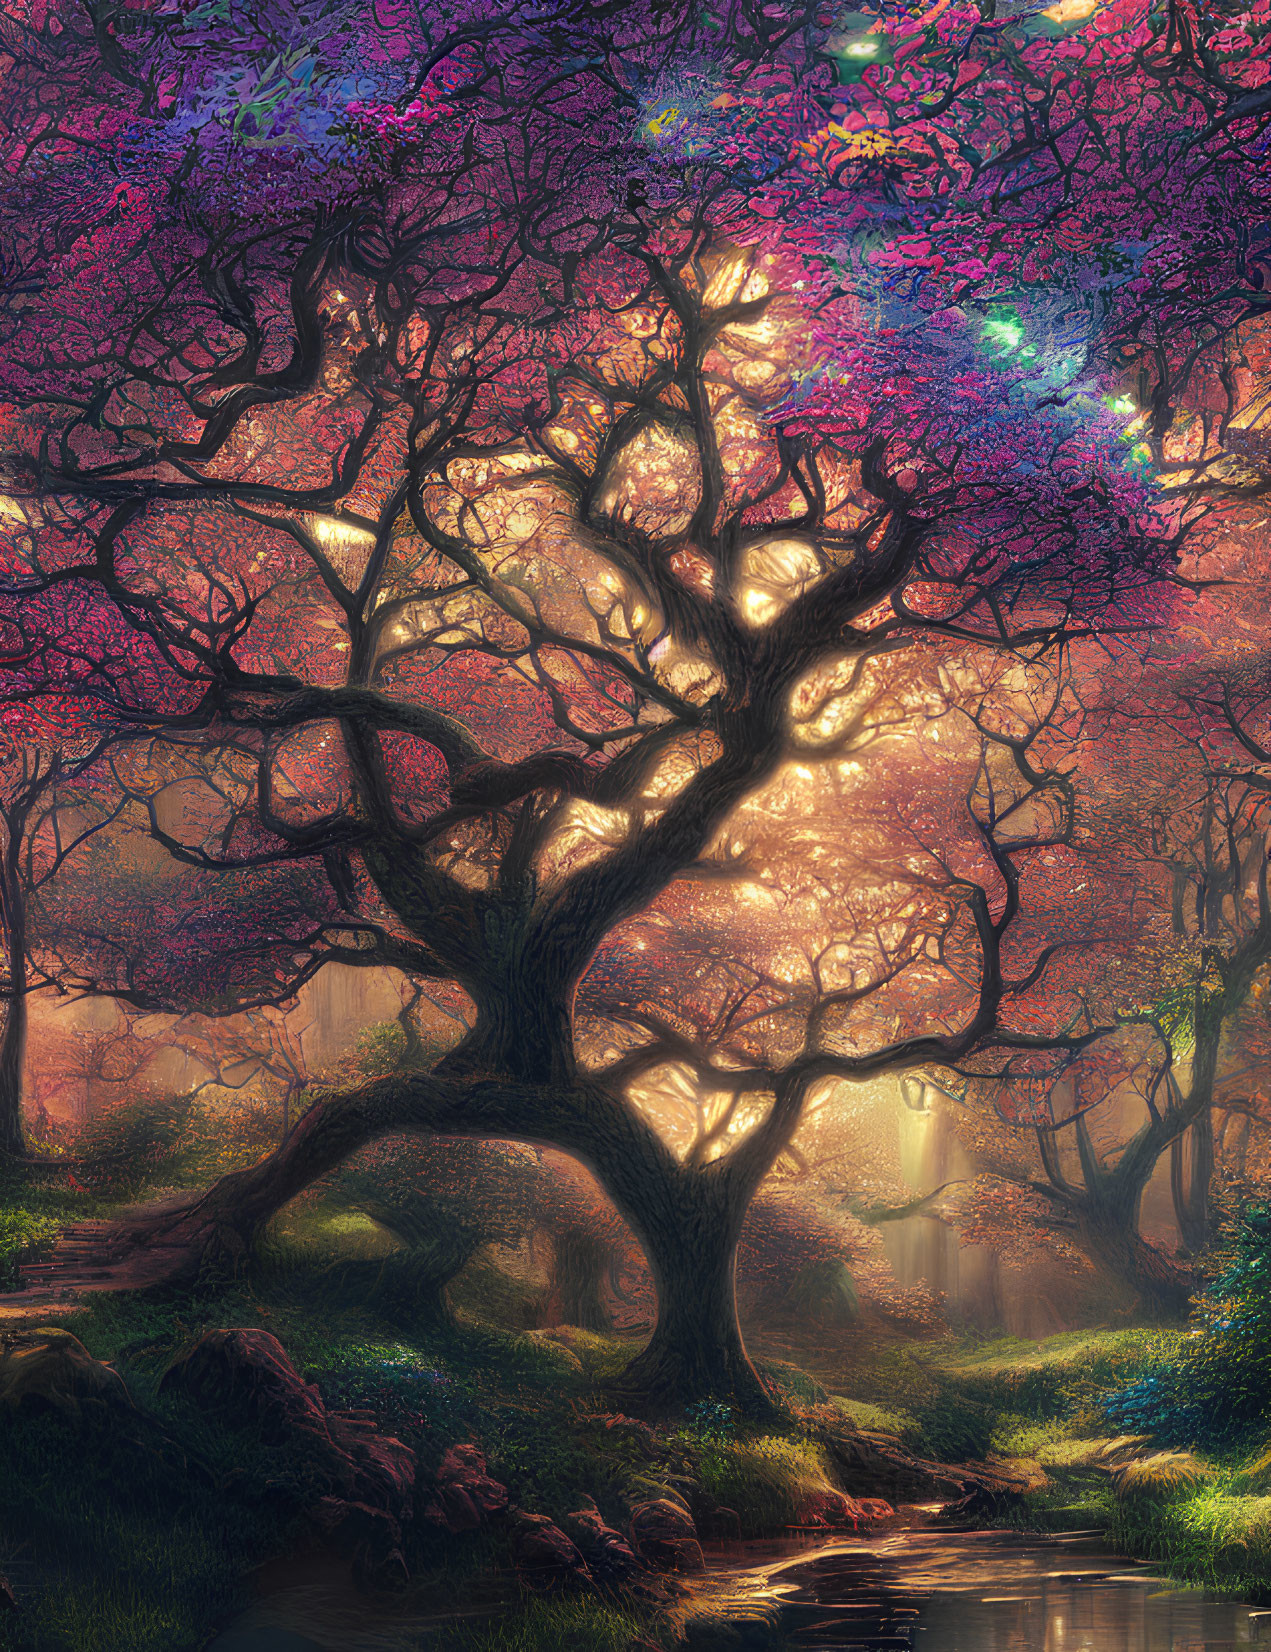 Enchanting forest scene with gnarled tree, pink and purple foliage, and tranquil stream